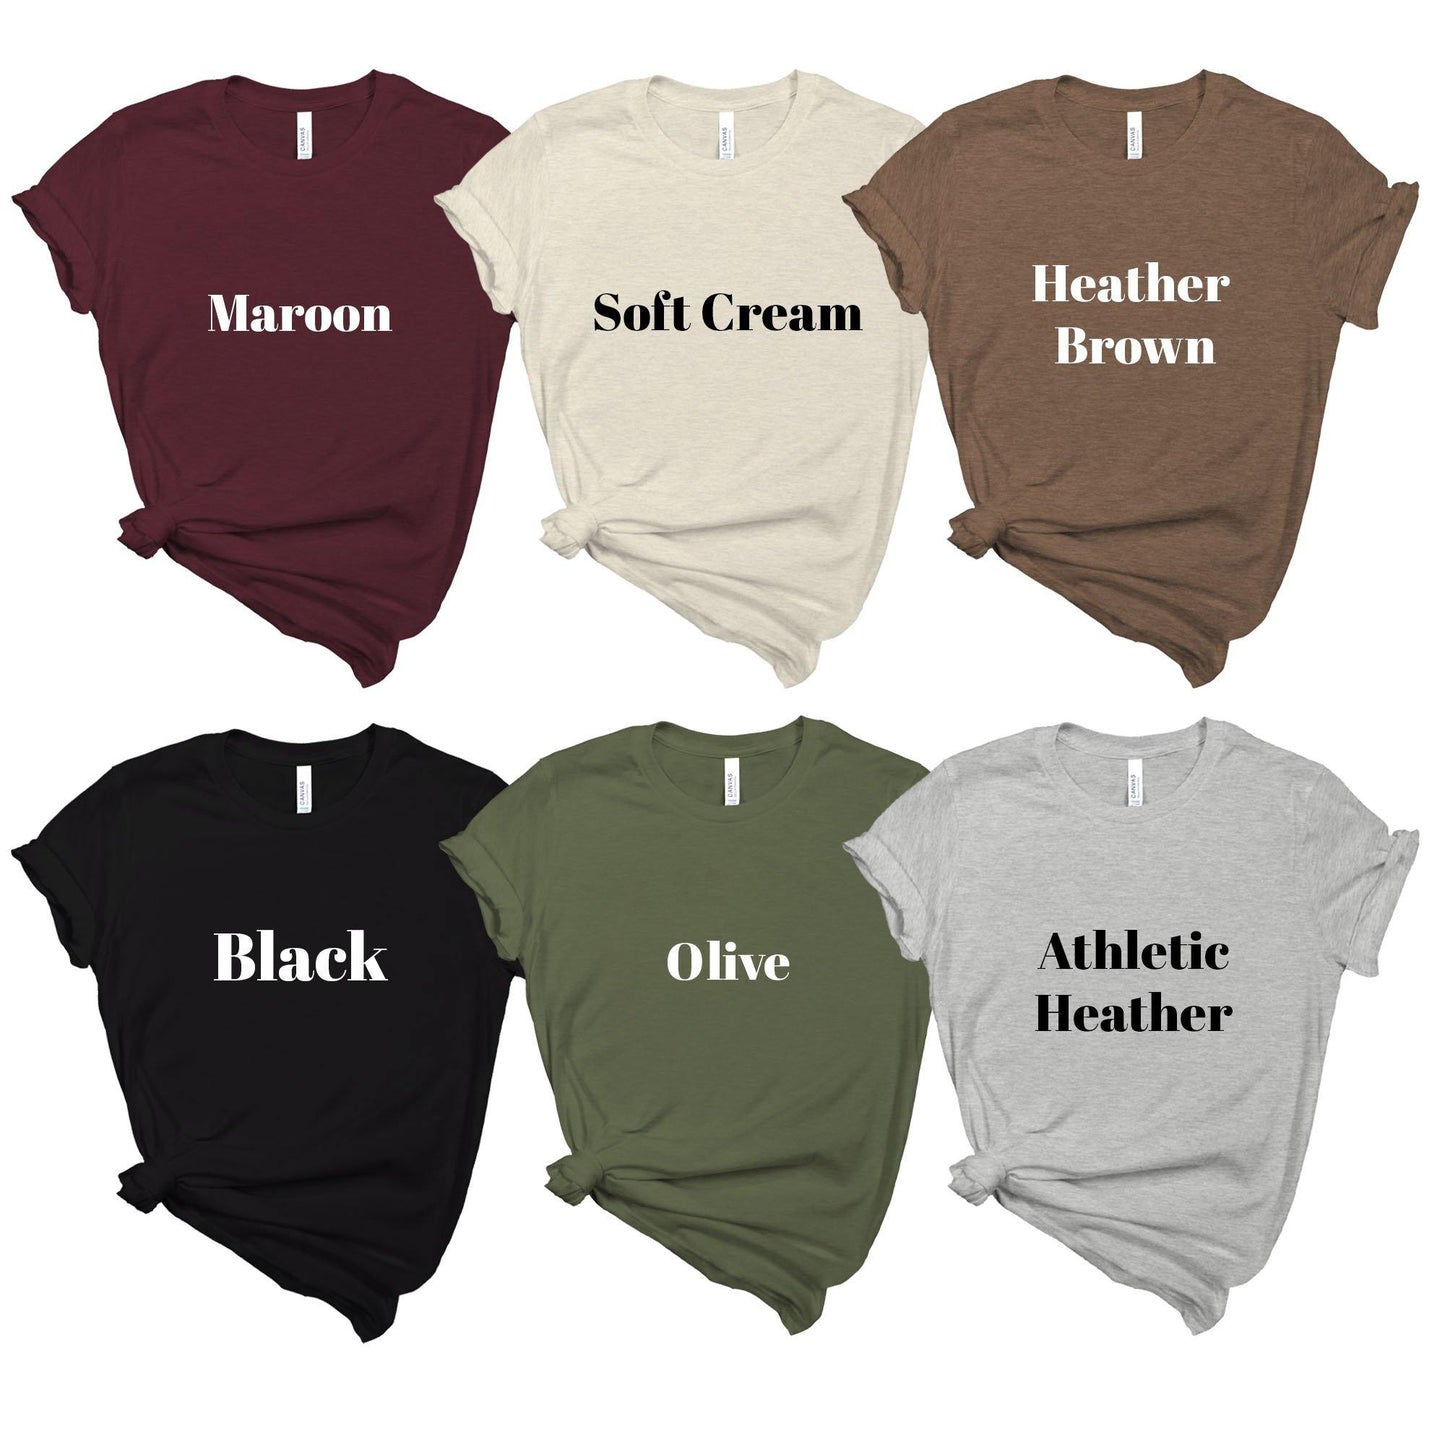 Shop Small T-Shirt - Support Small Business Shirt - Healthy Wealthy Skinny